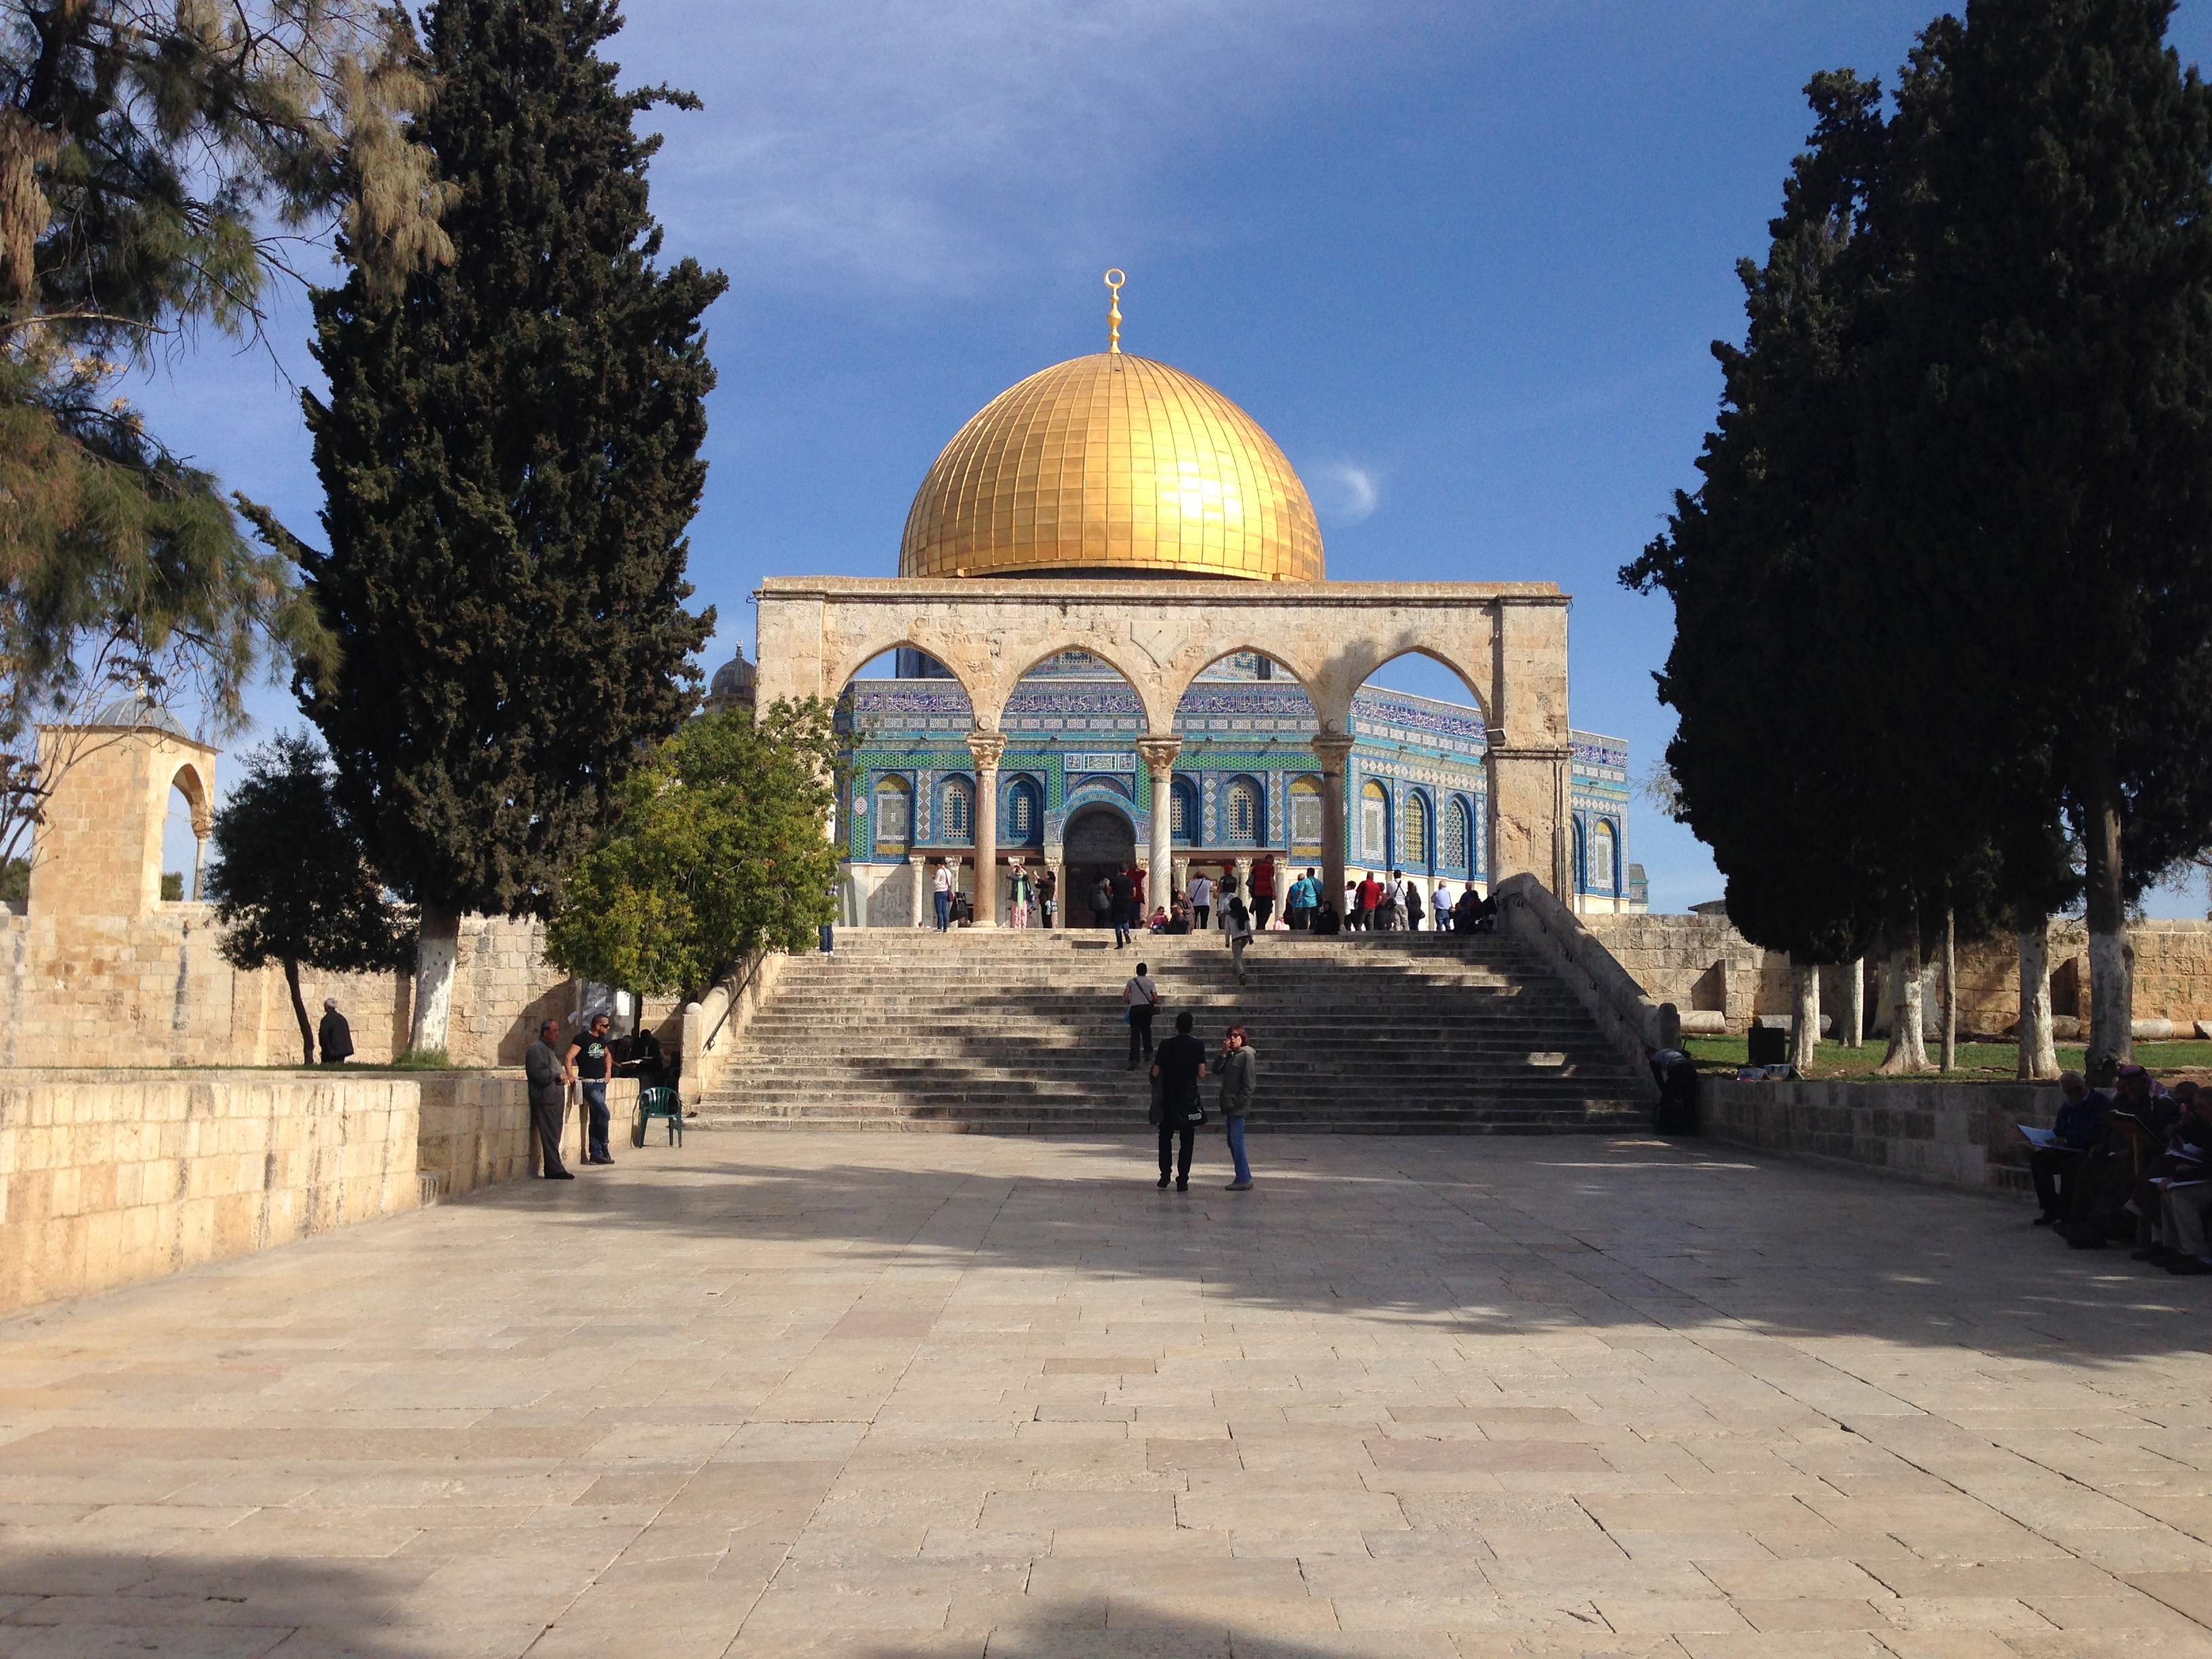 The Dome of the Rock is a Moslem mosque that sits on the historic site of the Jewish temple in Jerusalem